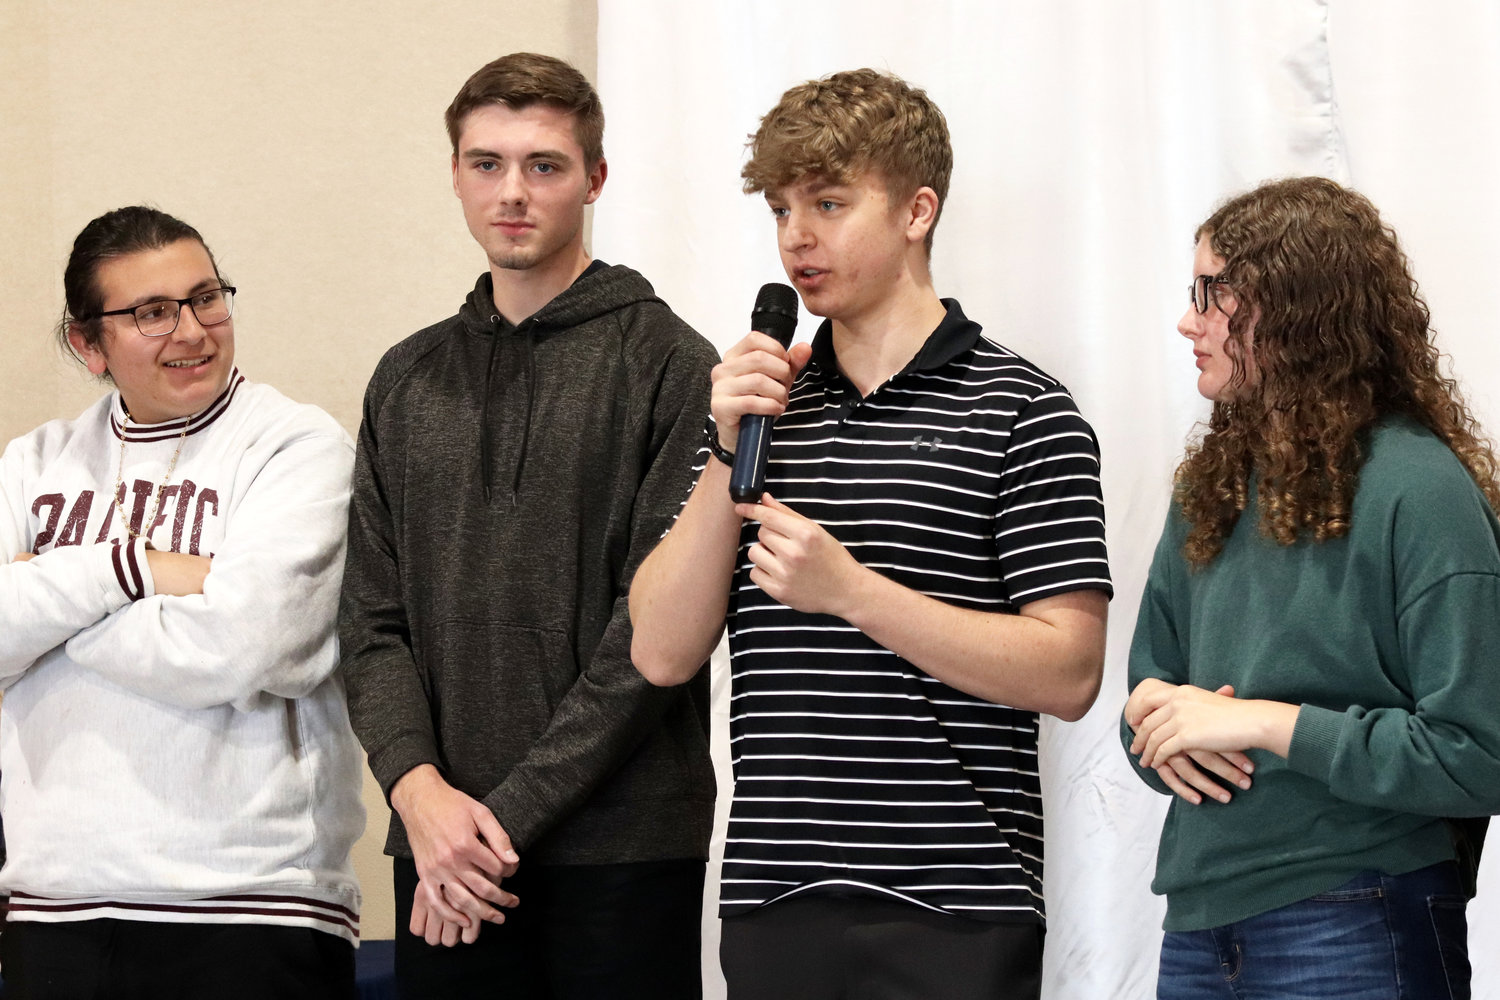 Austin Ulrigg of Centralia High School speaks during a scholarship luncheon in Chehalis on Monday about his plans to study math at the University of Washington. Next to Ulrigg, from left, are fellow Centralia seniors Victoriano Reyes, Landon Kaut and Lucy Nowicki.